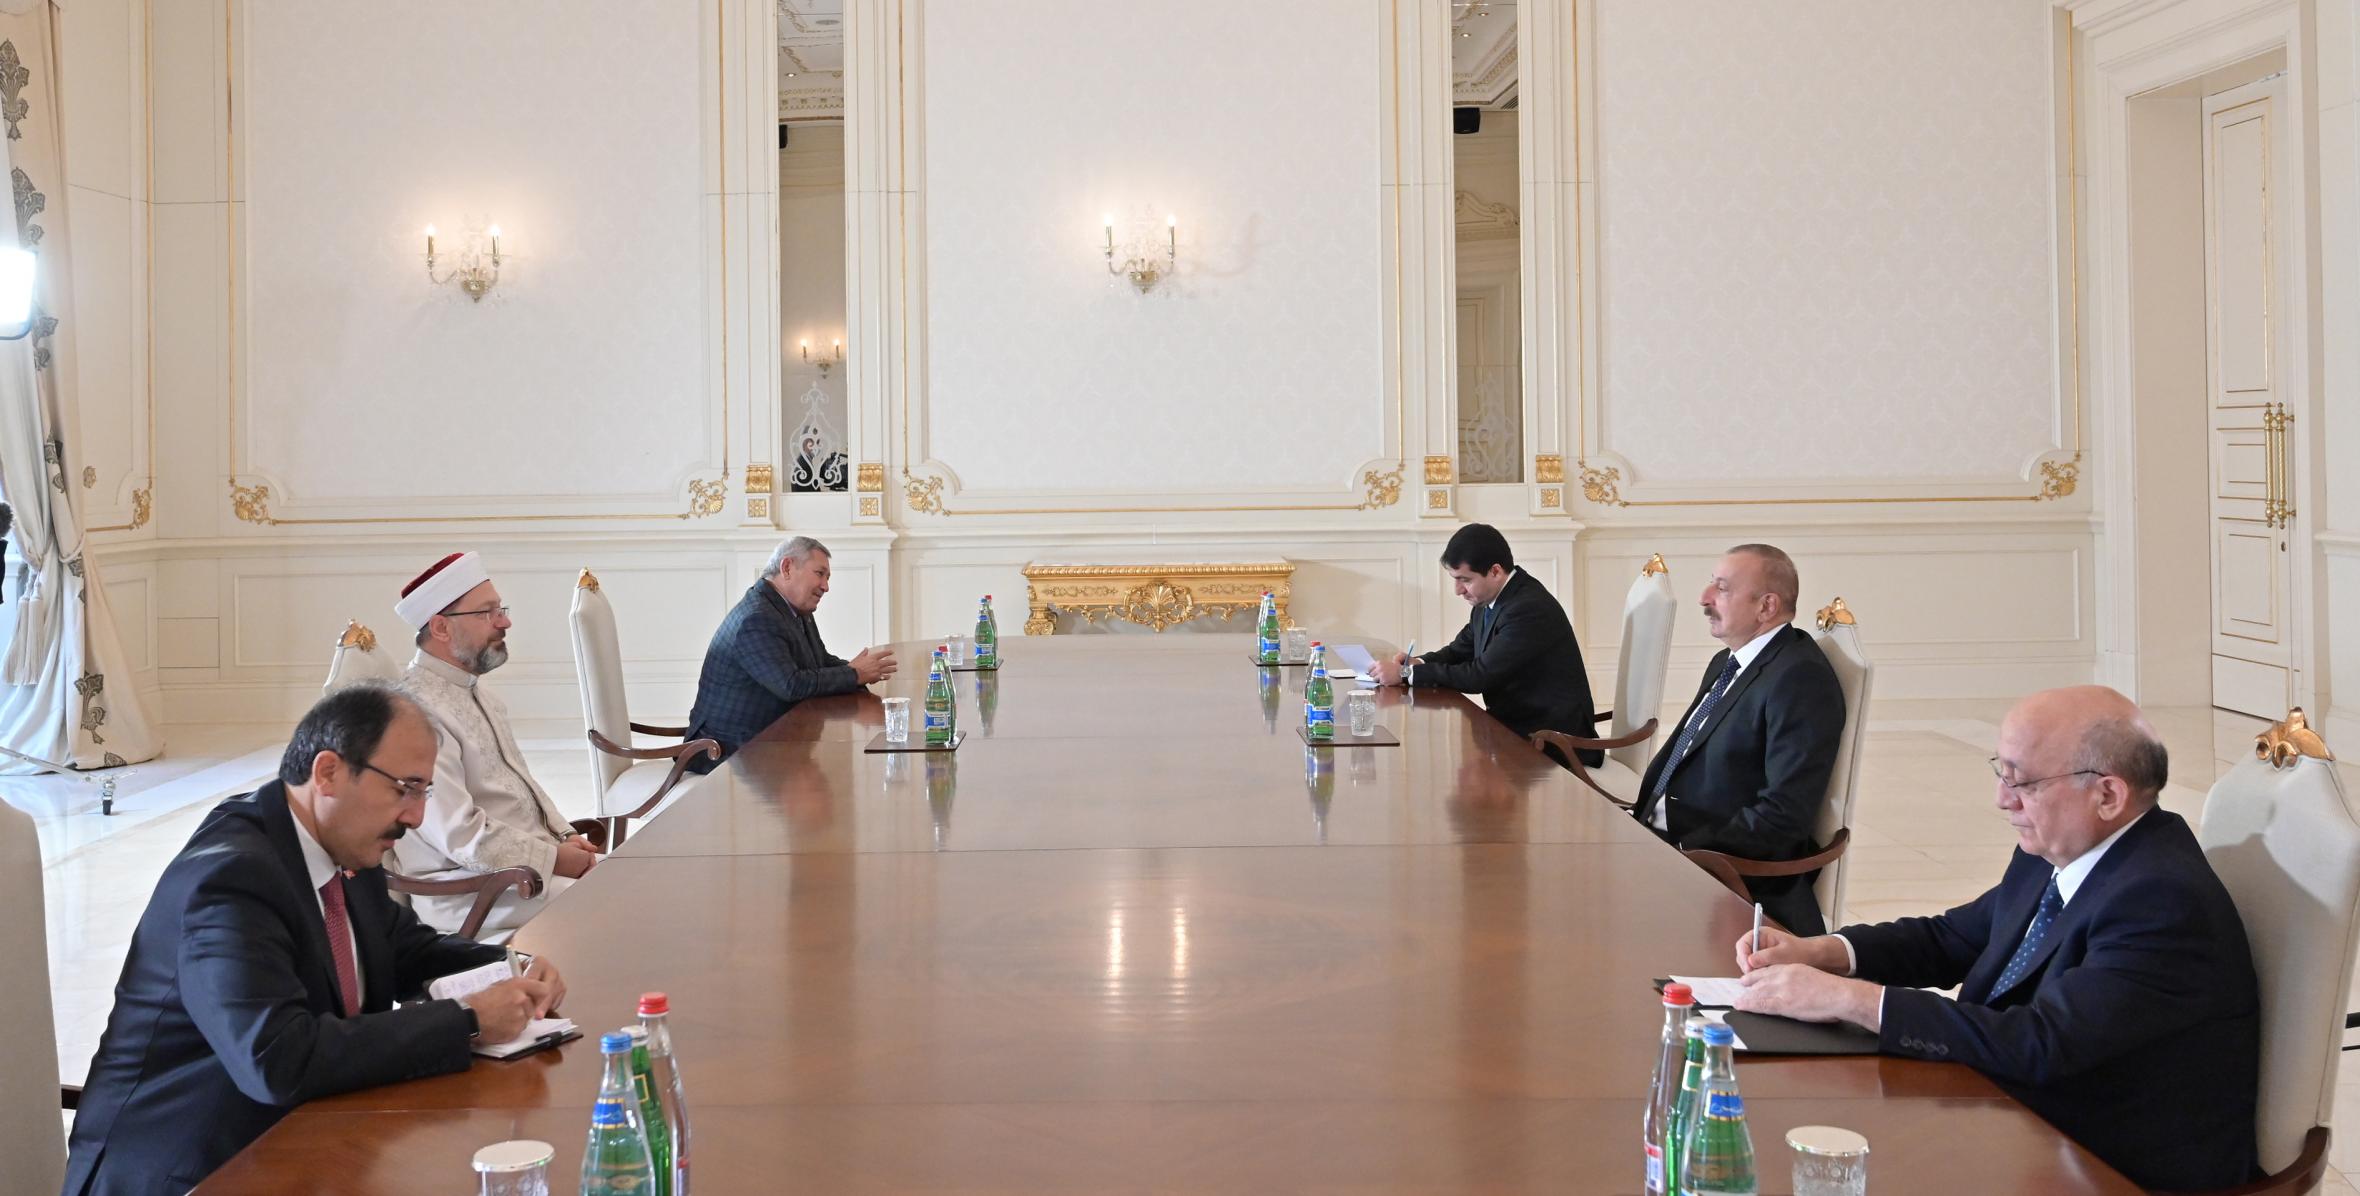 Ilham Aliyev received the chairman of the office for religious affairs of Turkey